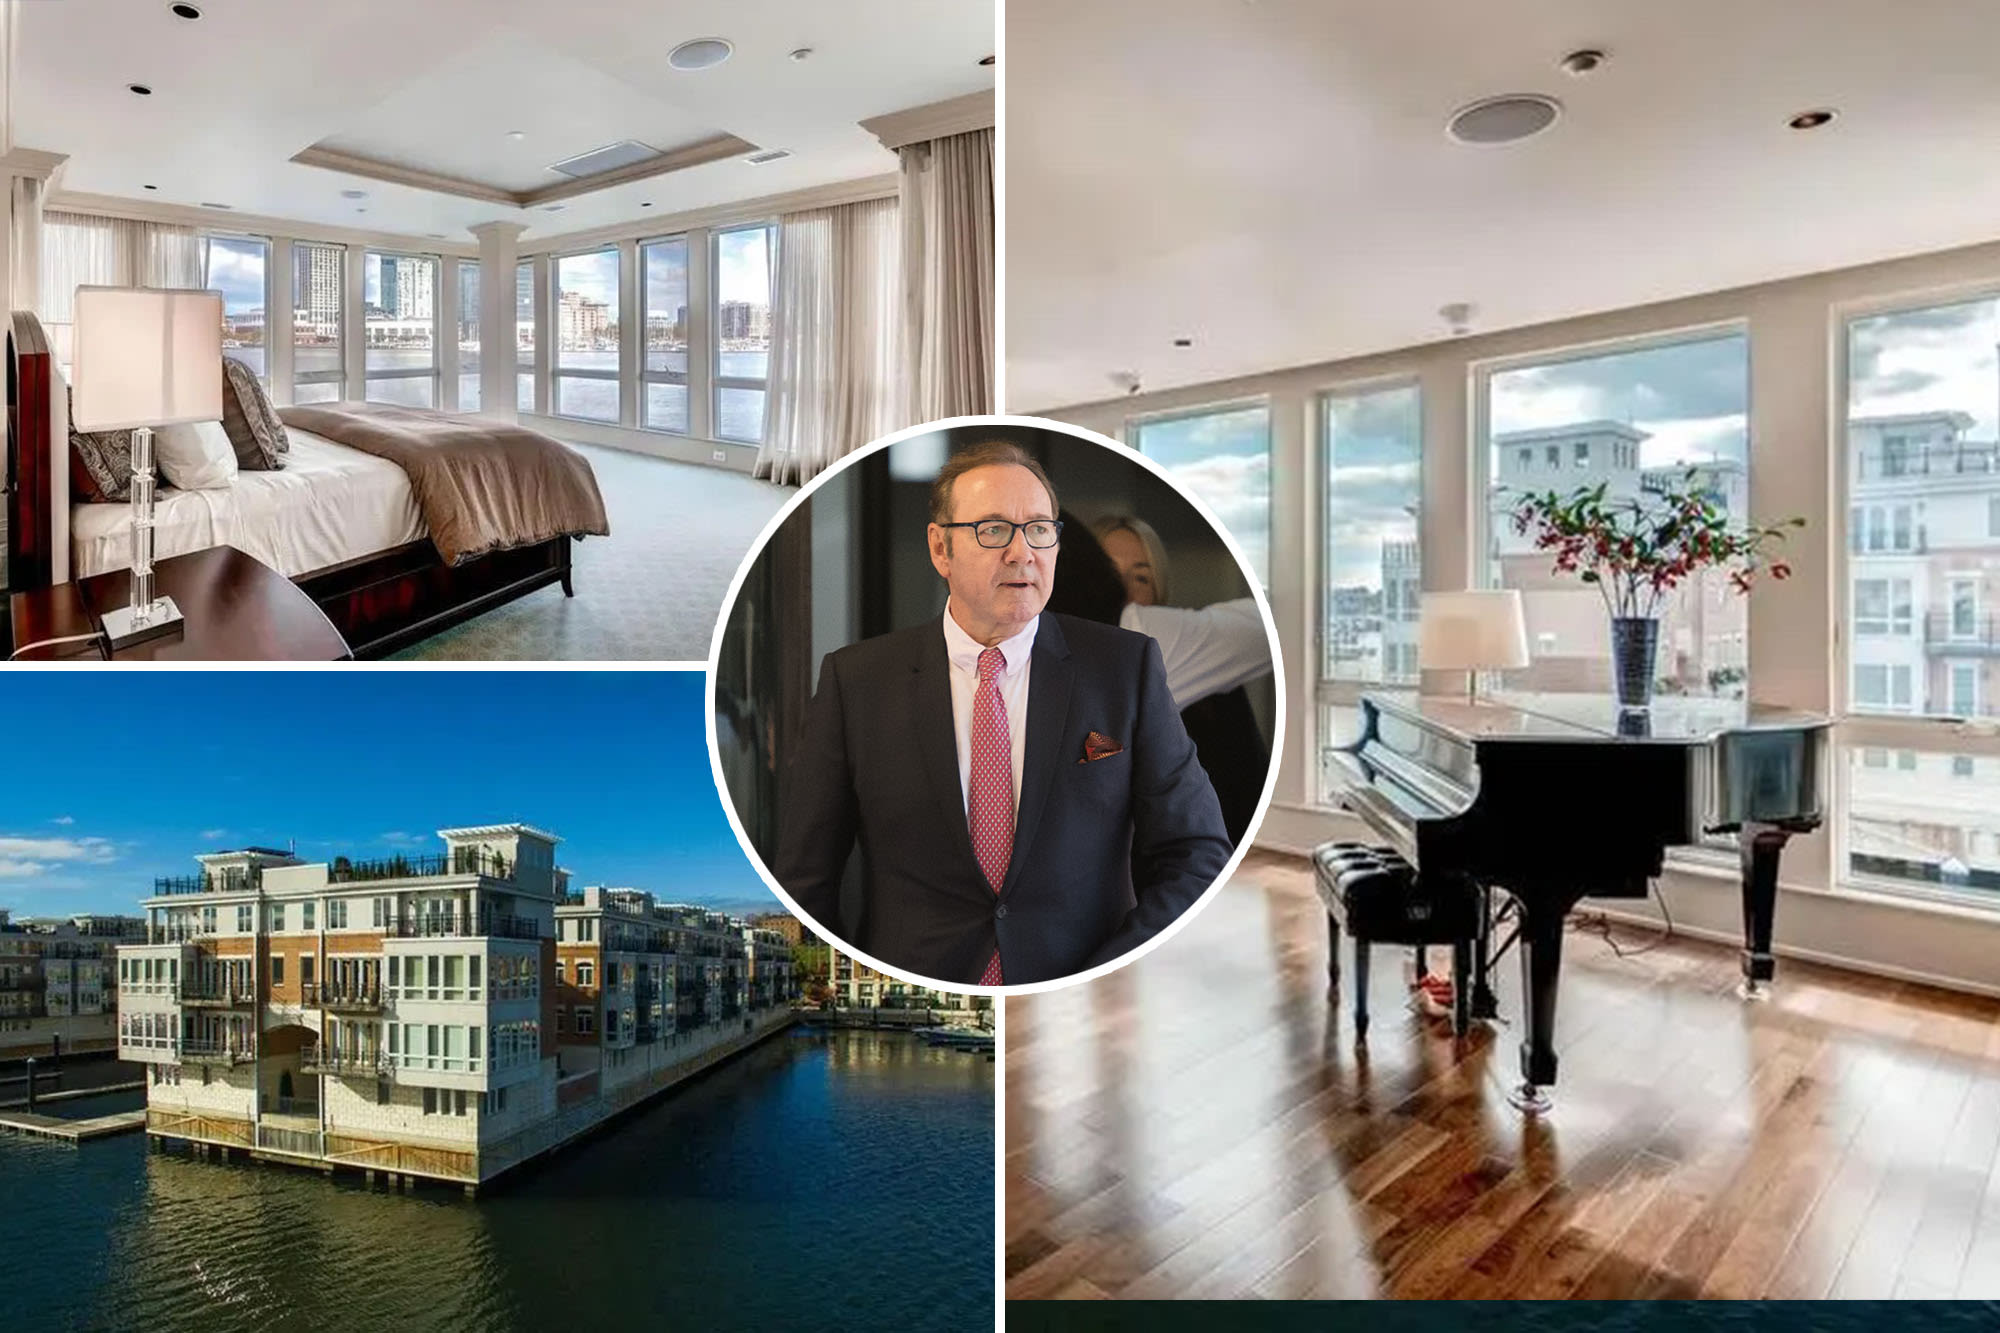 Kevin Spacey’s five-story waterfront Baltimore residence is auctioned off for $3.24M